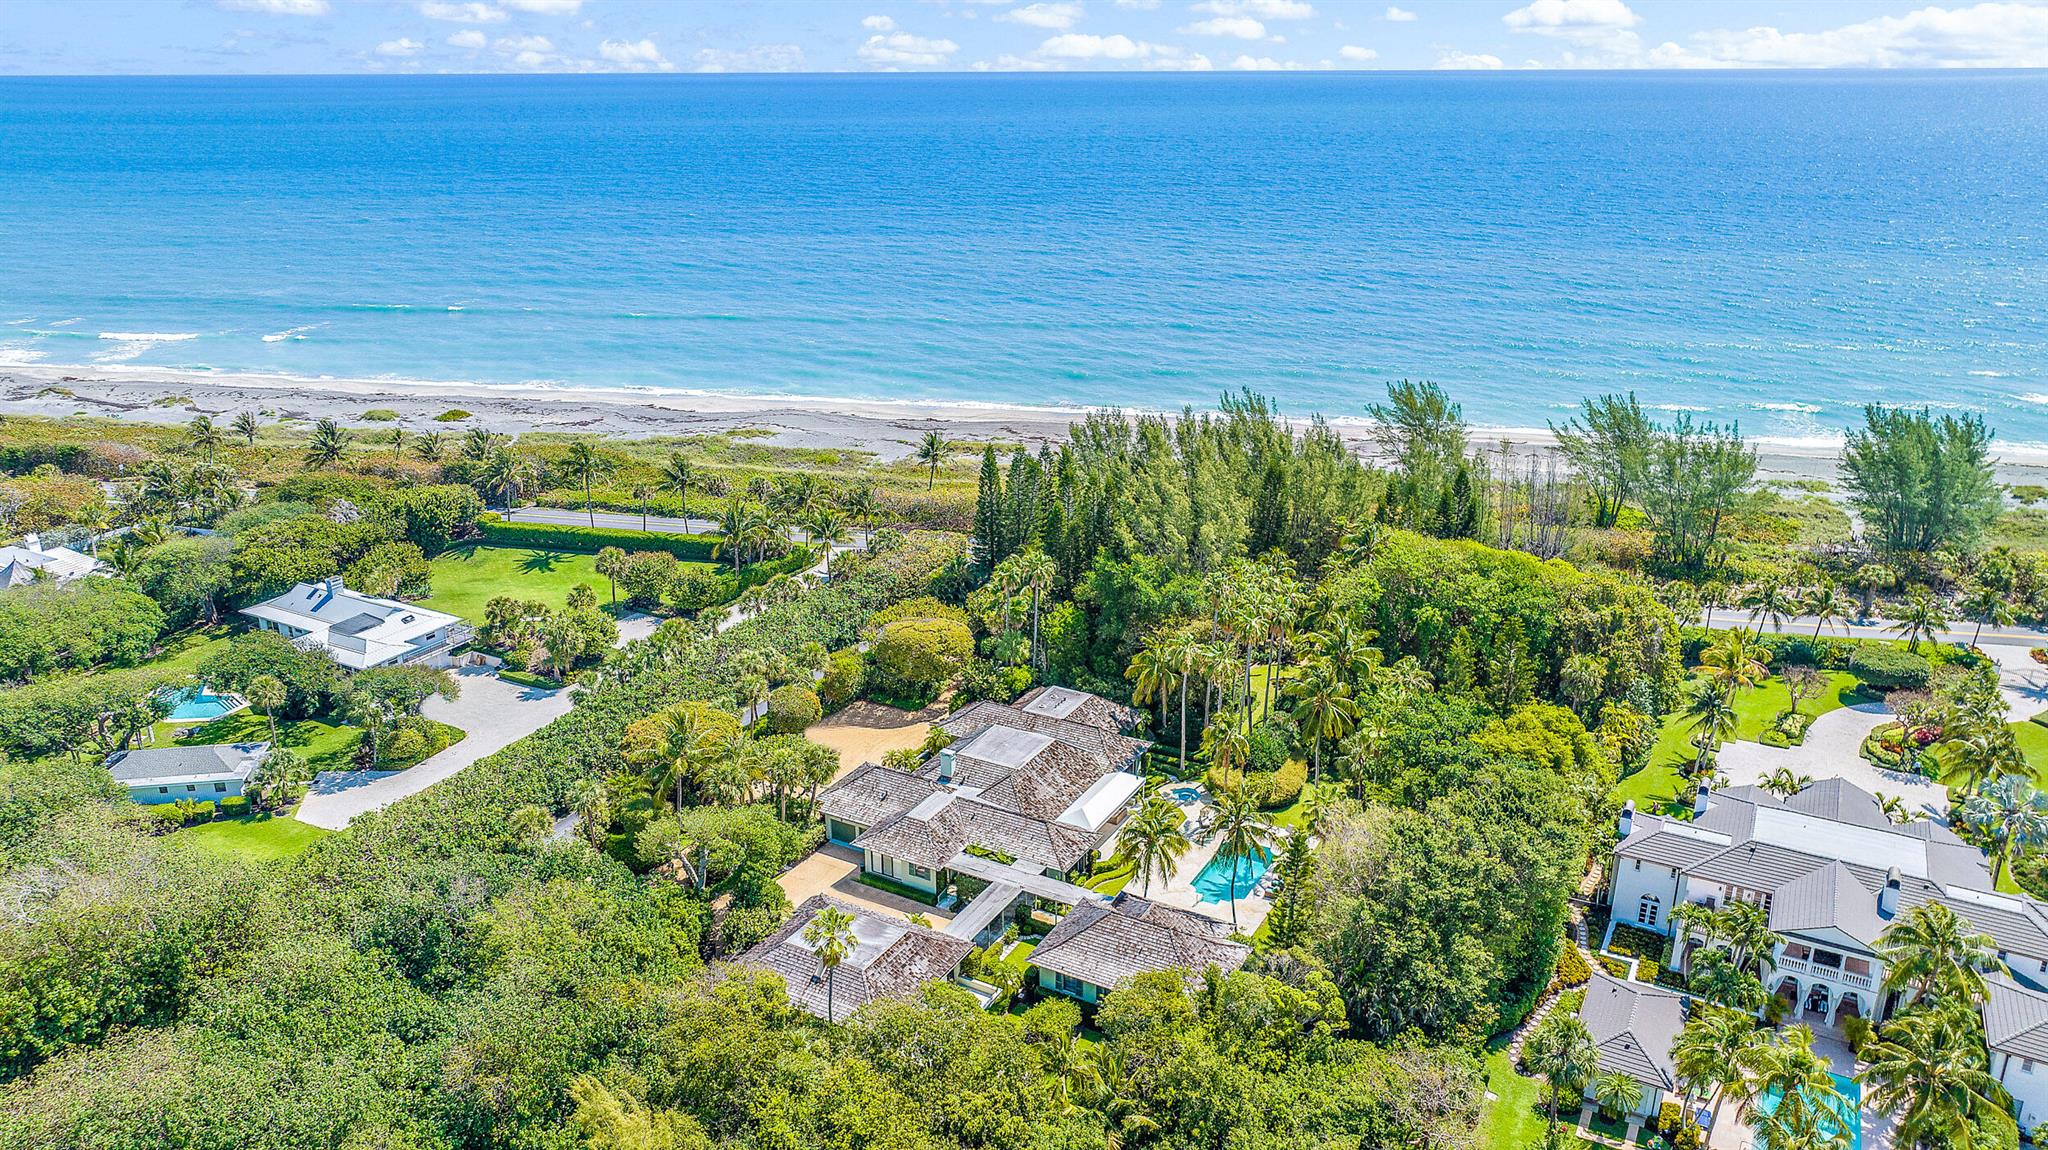 Completely private, furnished oceanfront main house with two guesthouses totaling  of 6 bedrooms, each with an ensuite bathroom on 3 acres. Newly resurfaced pool and spa. Deeded beach.